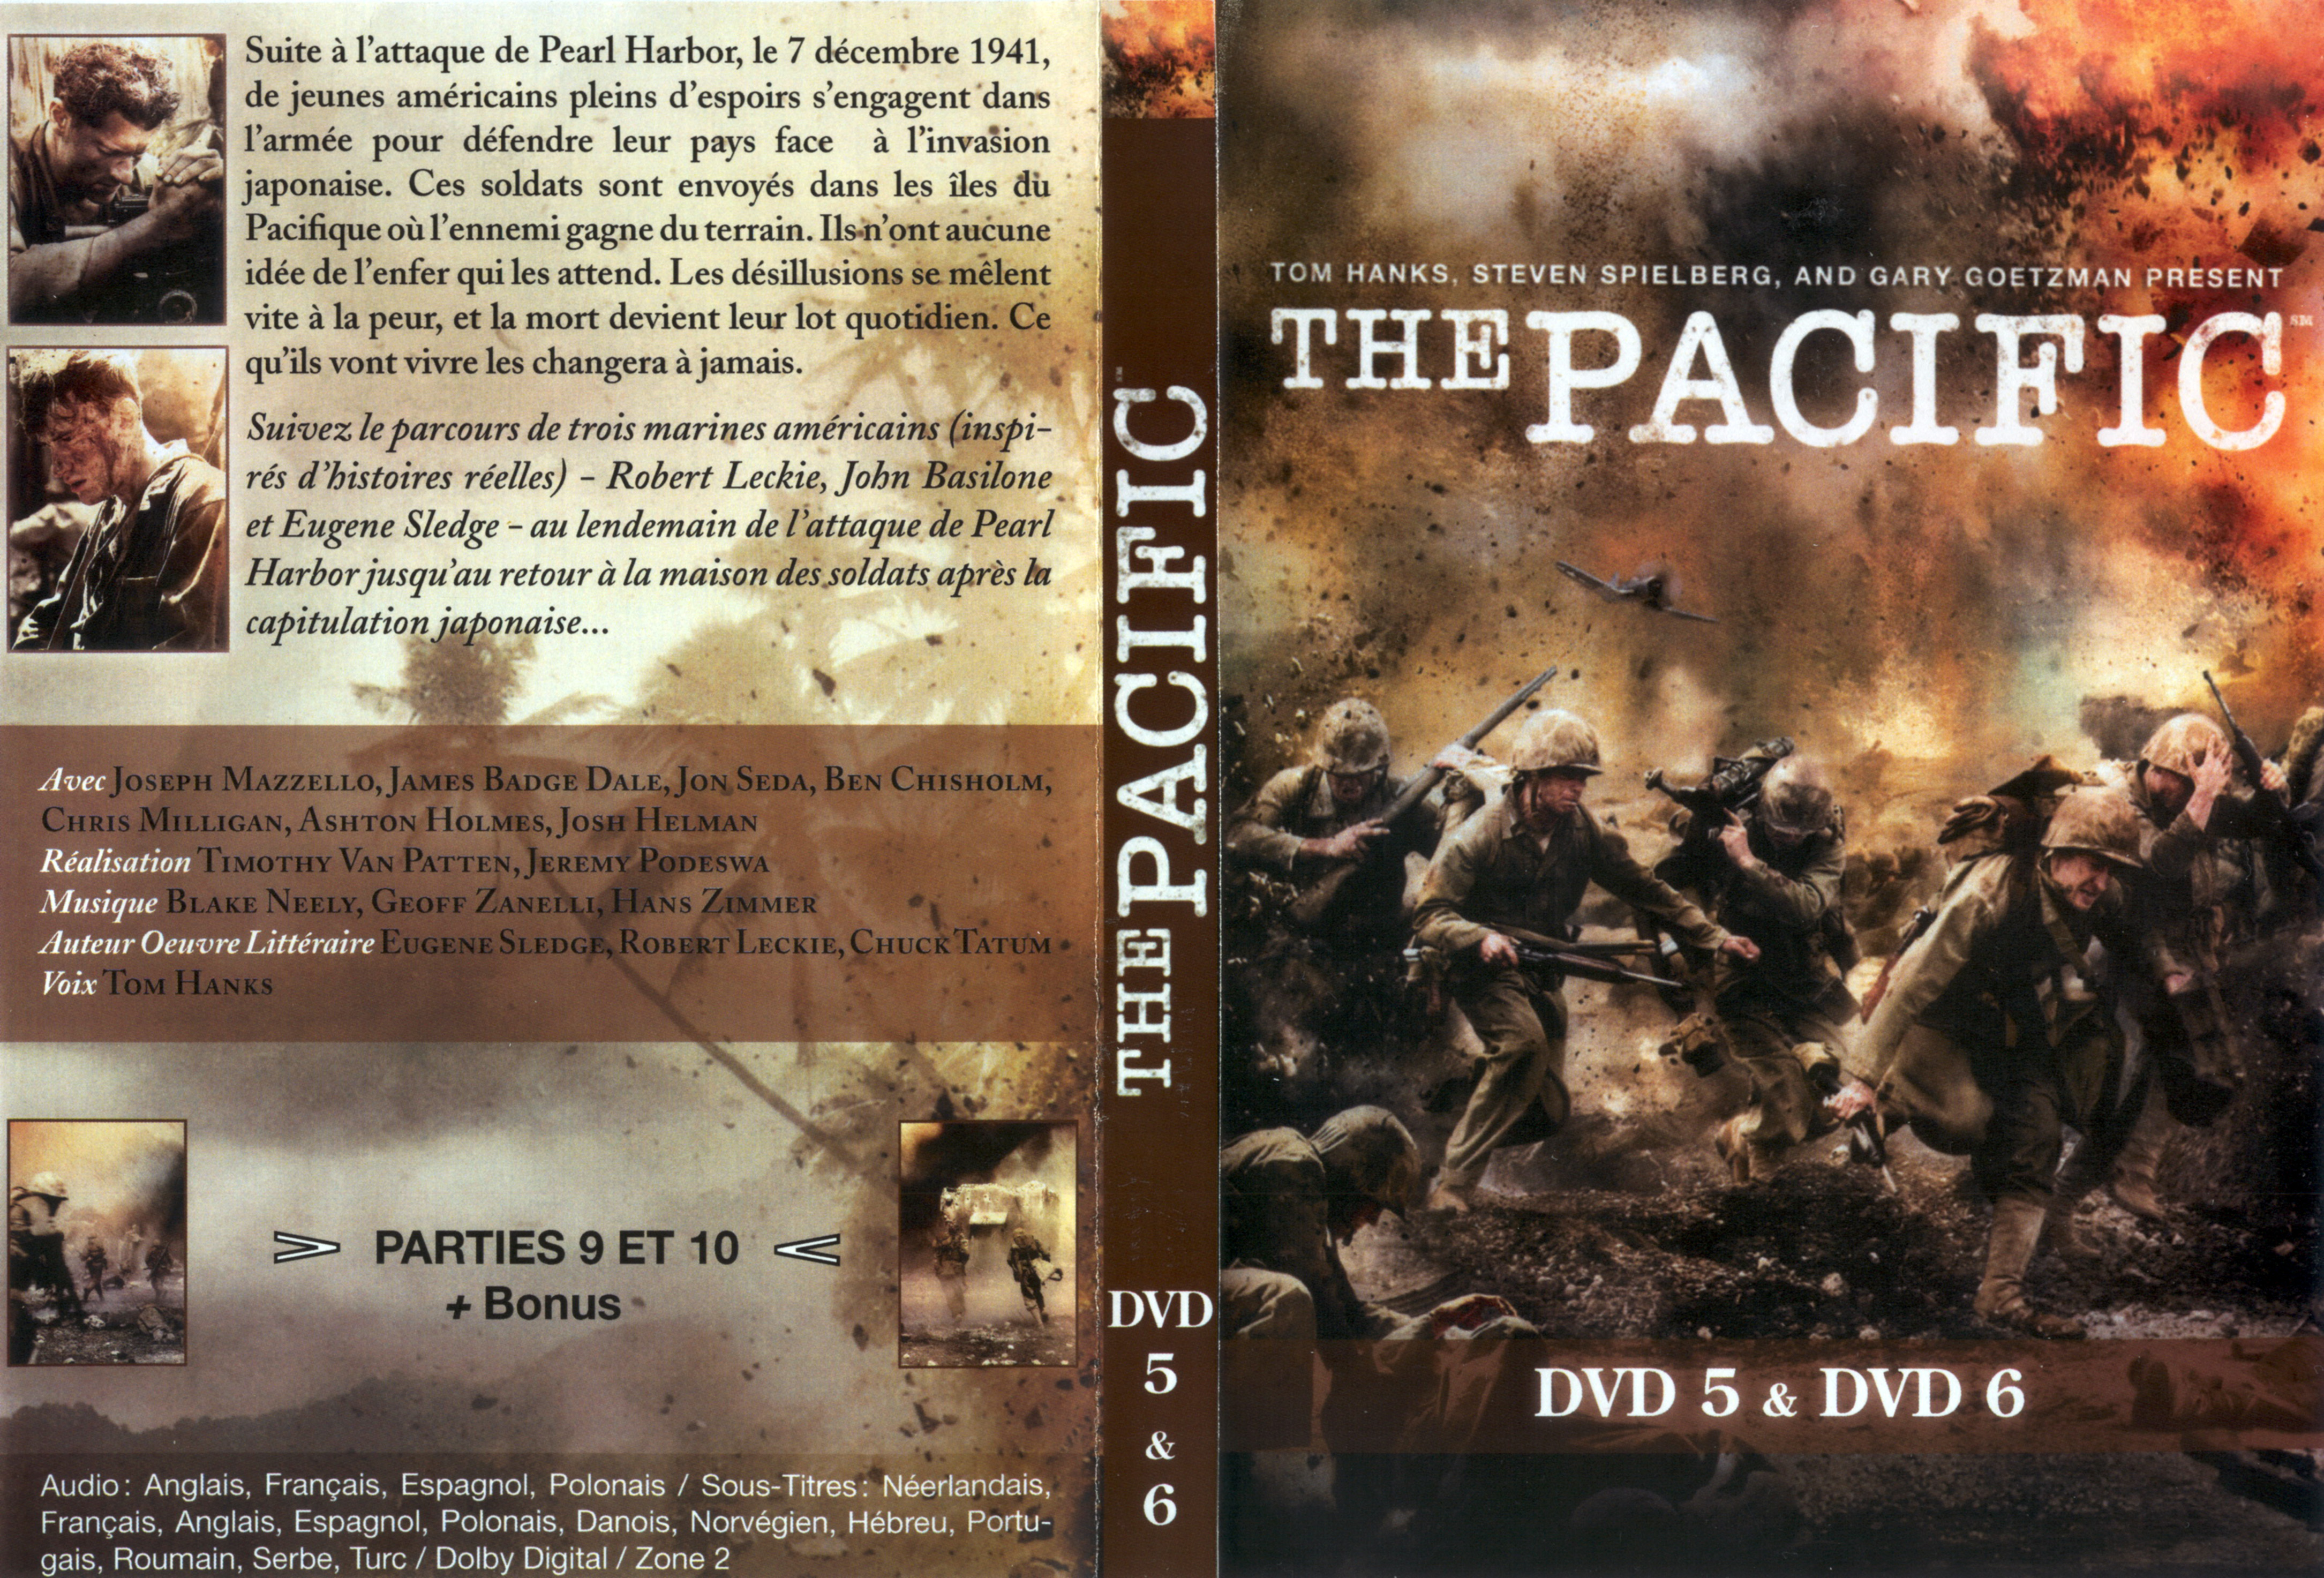 Jaquette DVD The Pacific DVD 3